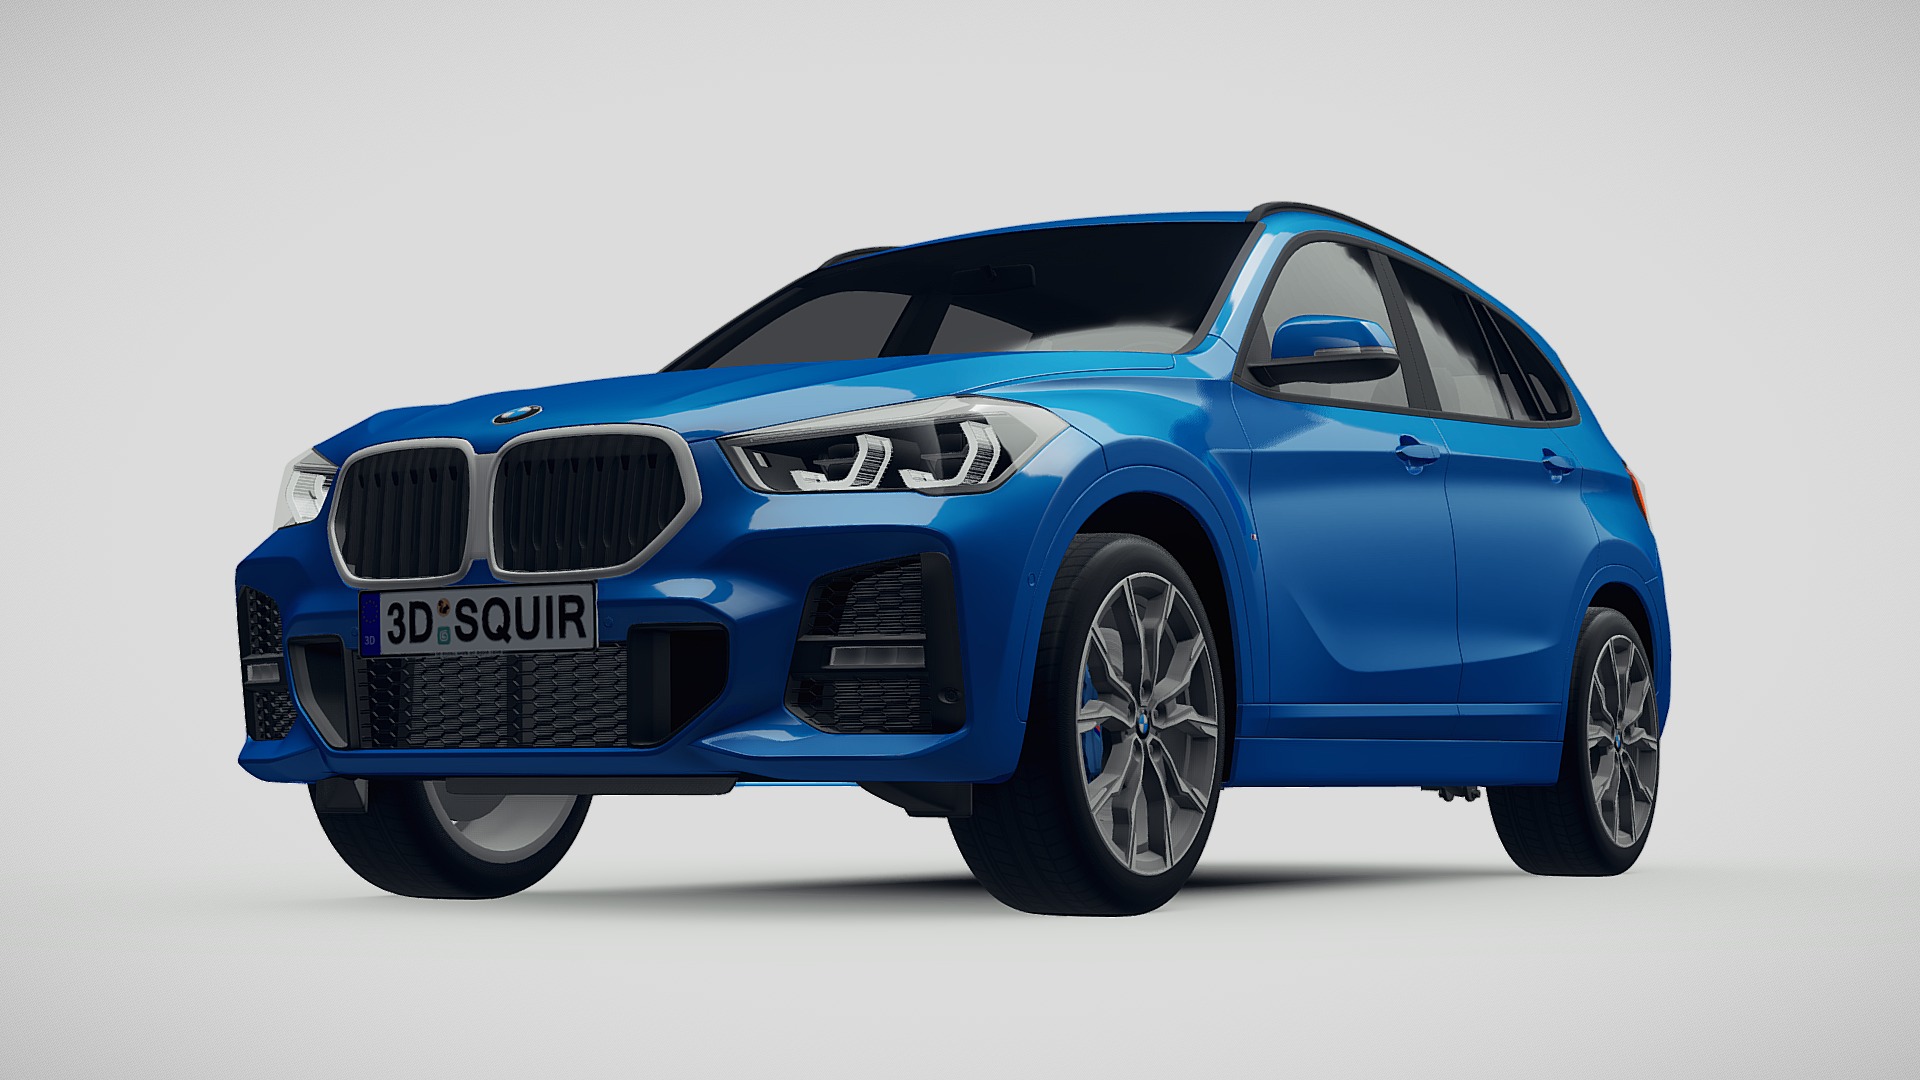 3D model BMW X1 M Sport 2020 - This is a 3D model of the BMW X1 M Sport 2020. The 3D model is about a blue car with a white background.